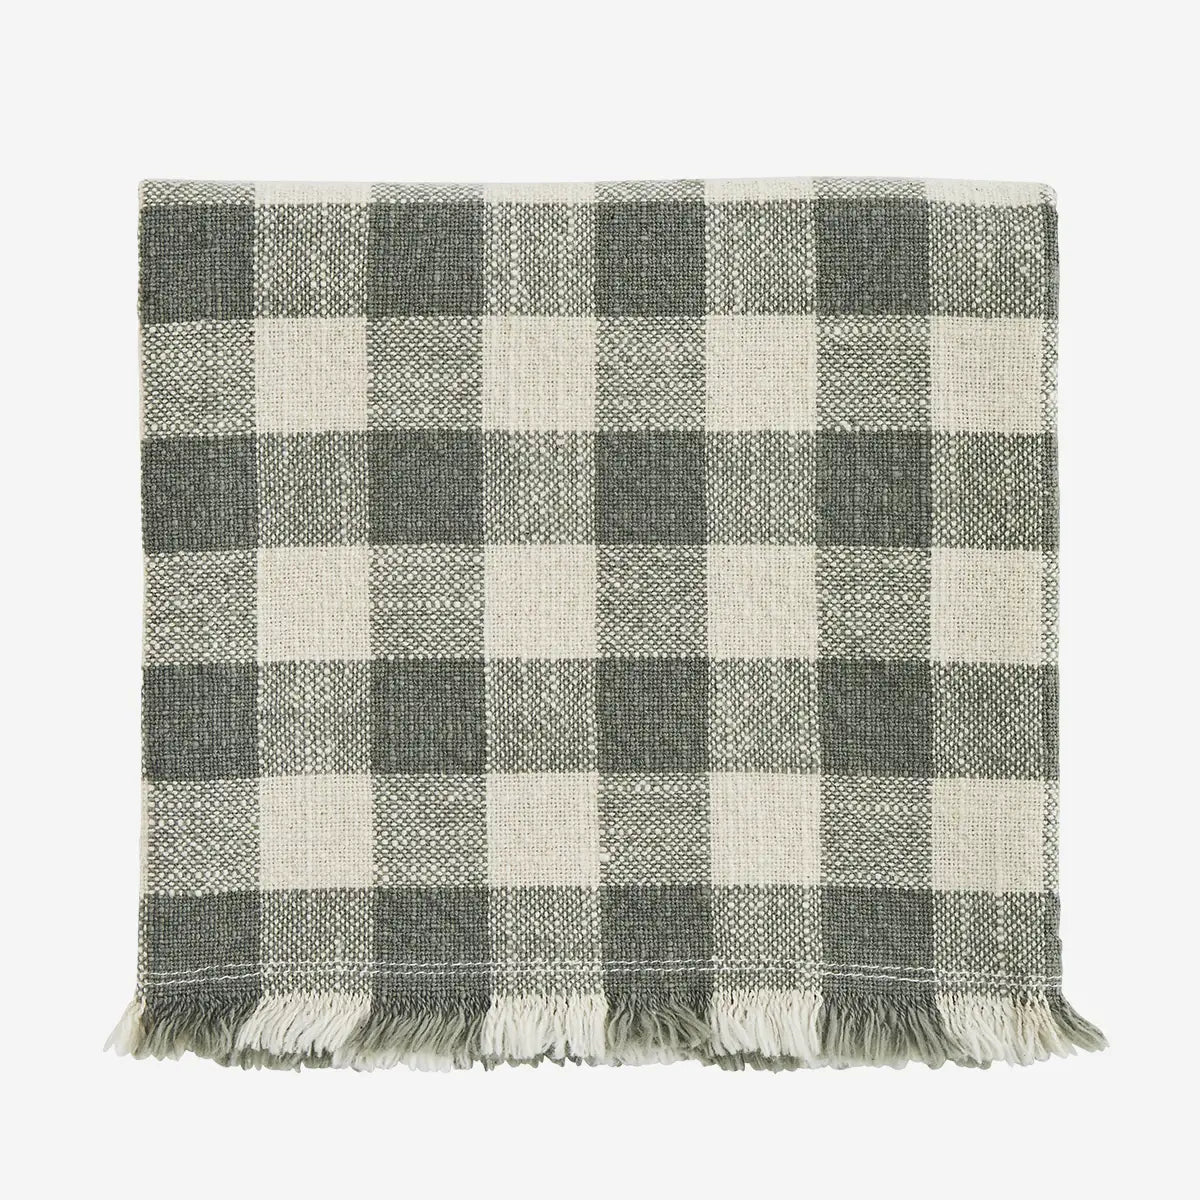 Checked kitchen towel with fringes-green